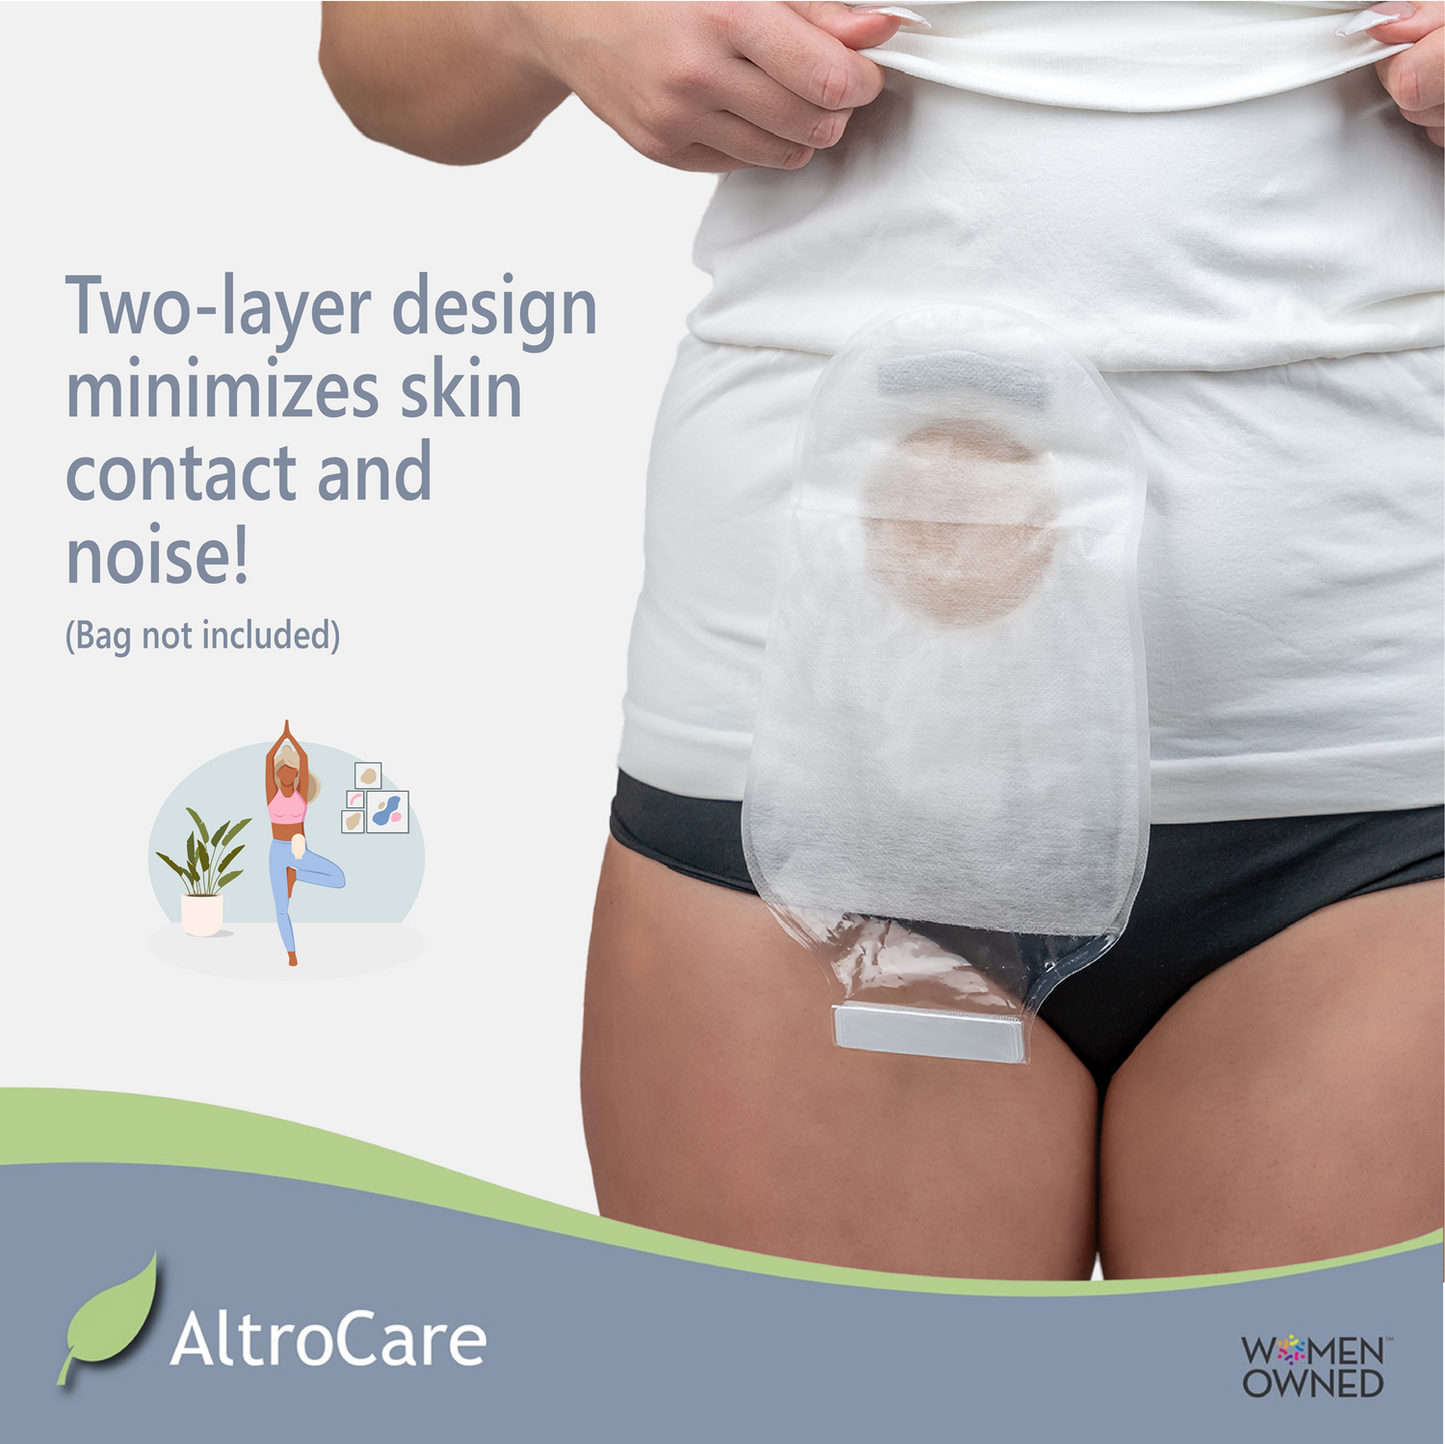 Ostomy Support Wrap (Case of 20)